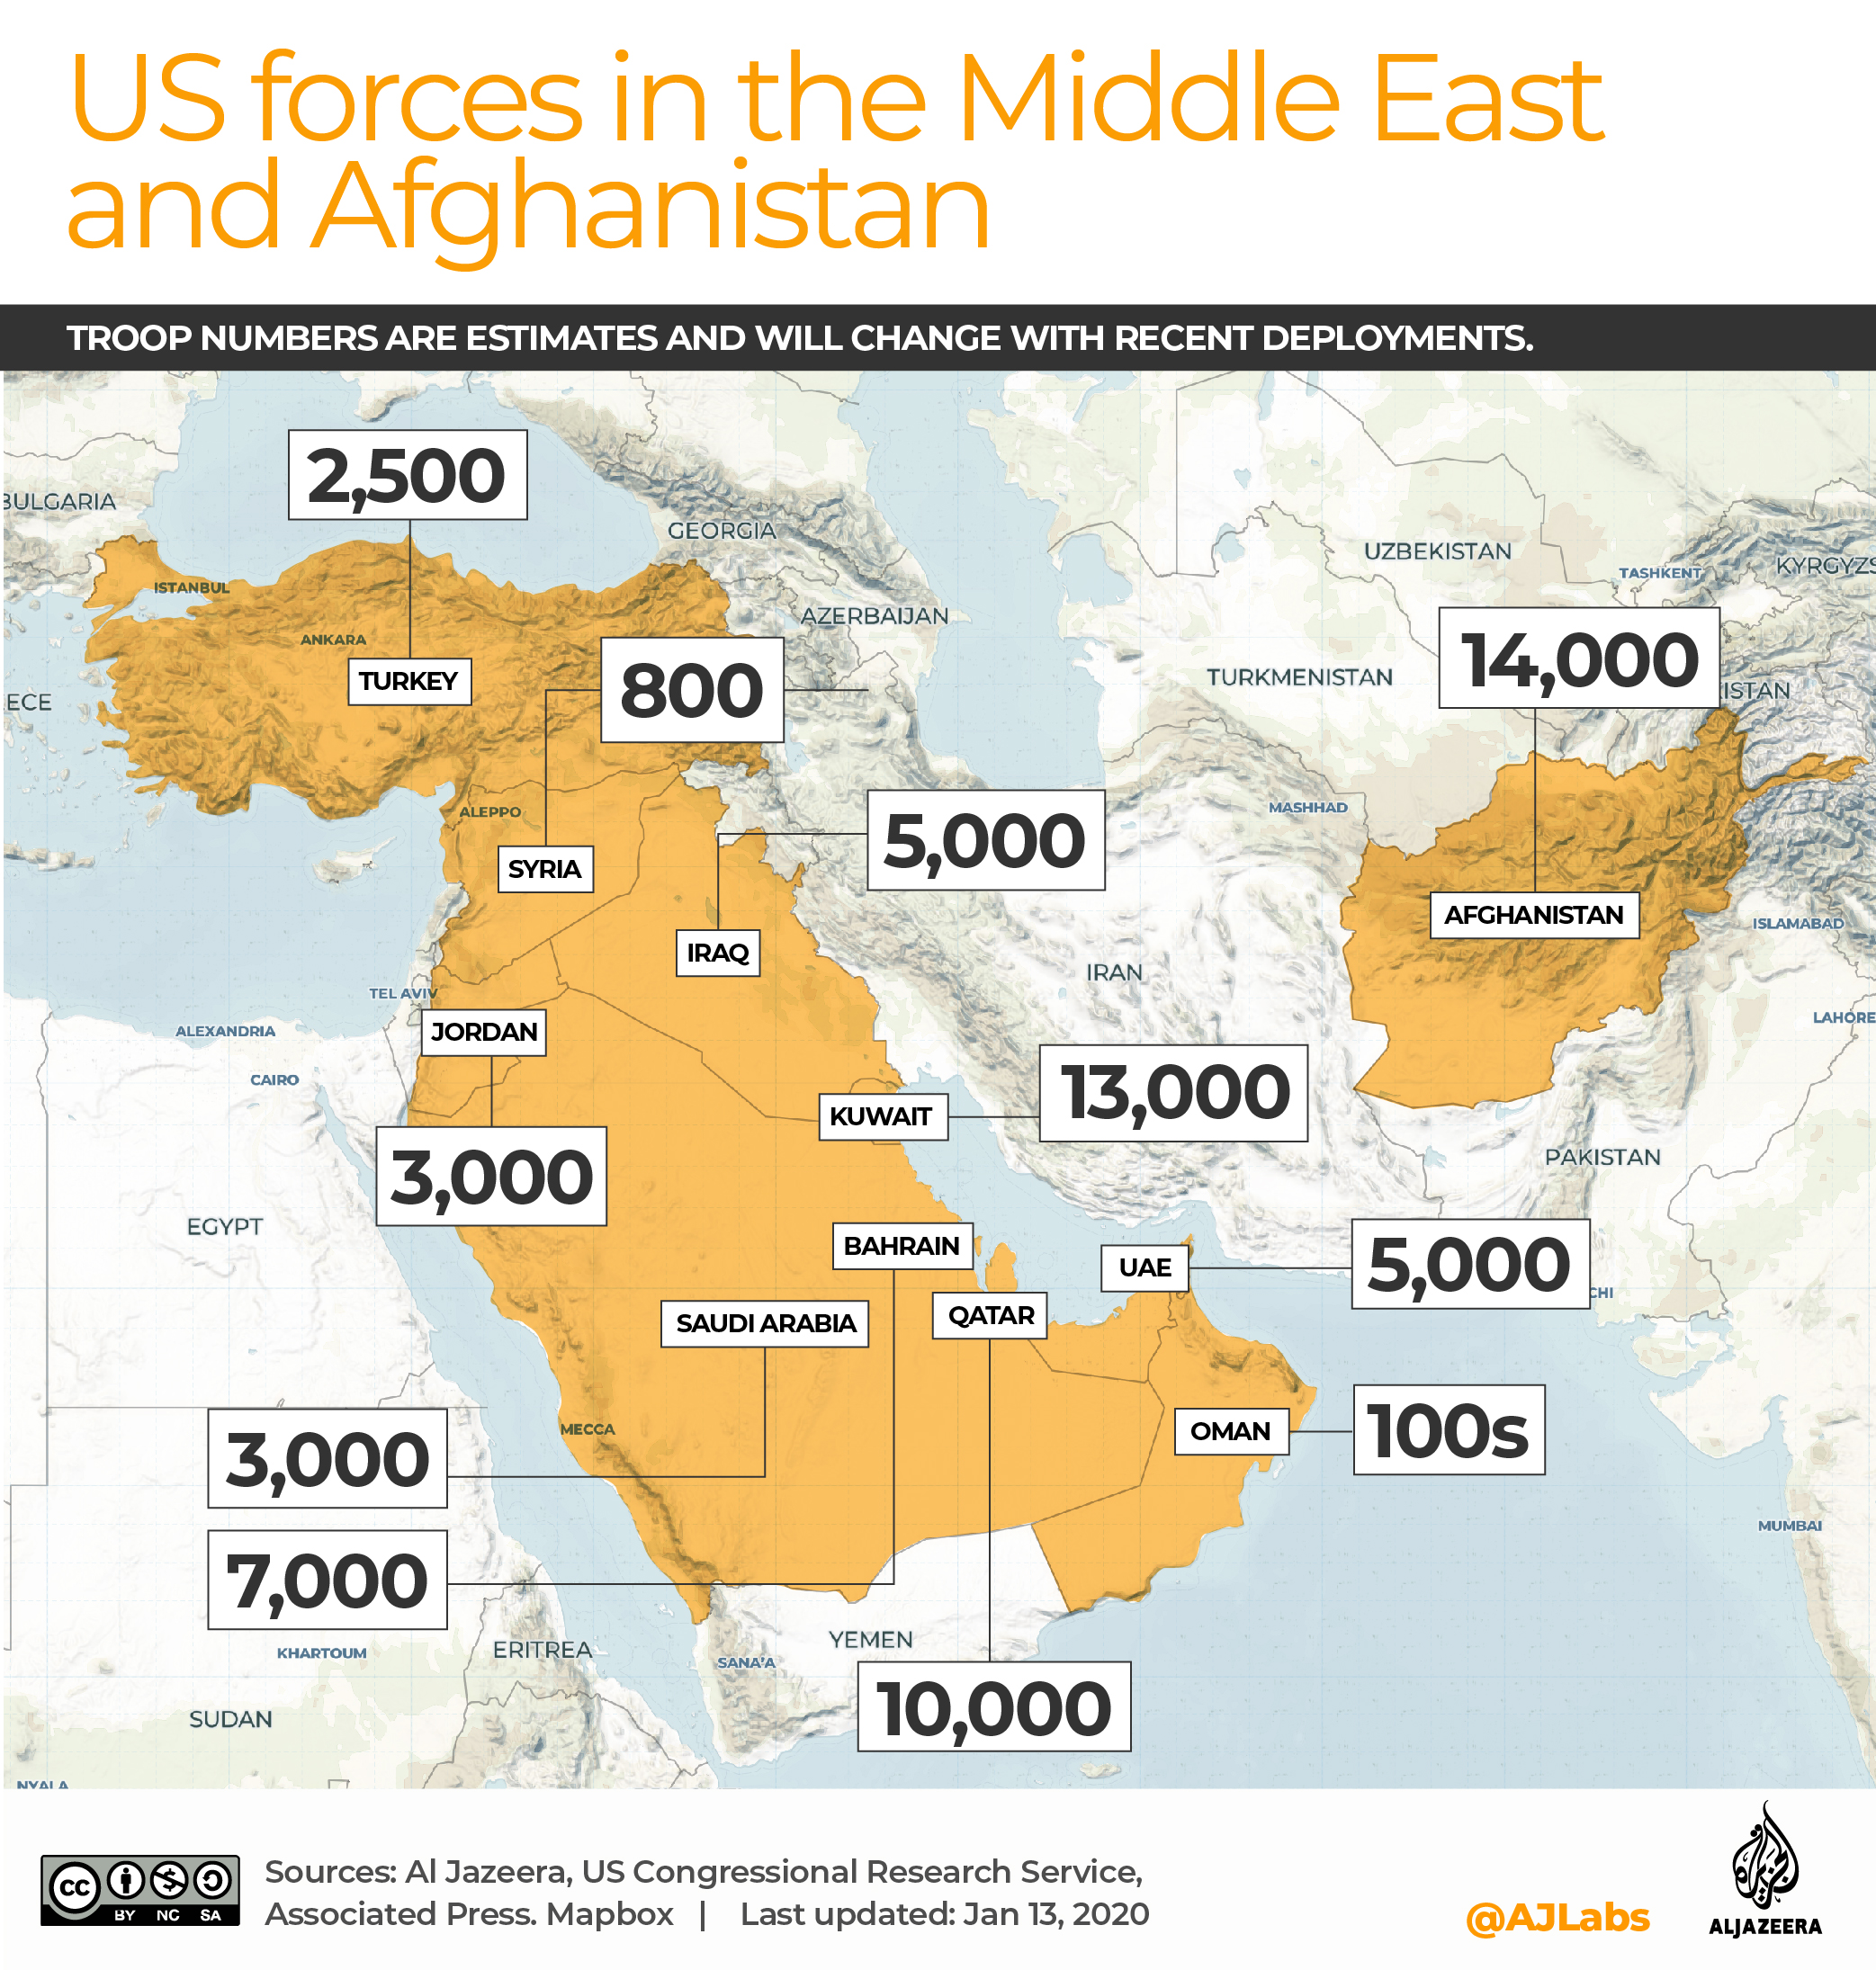 INTERACTIVE: US forces in the Middle East and Afghanistan 